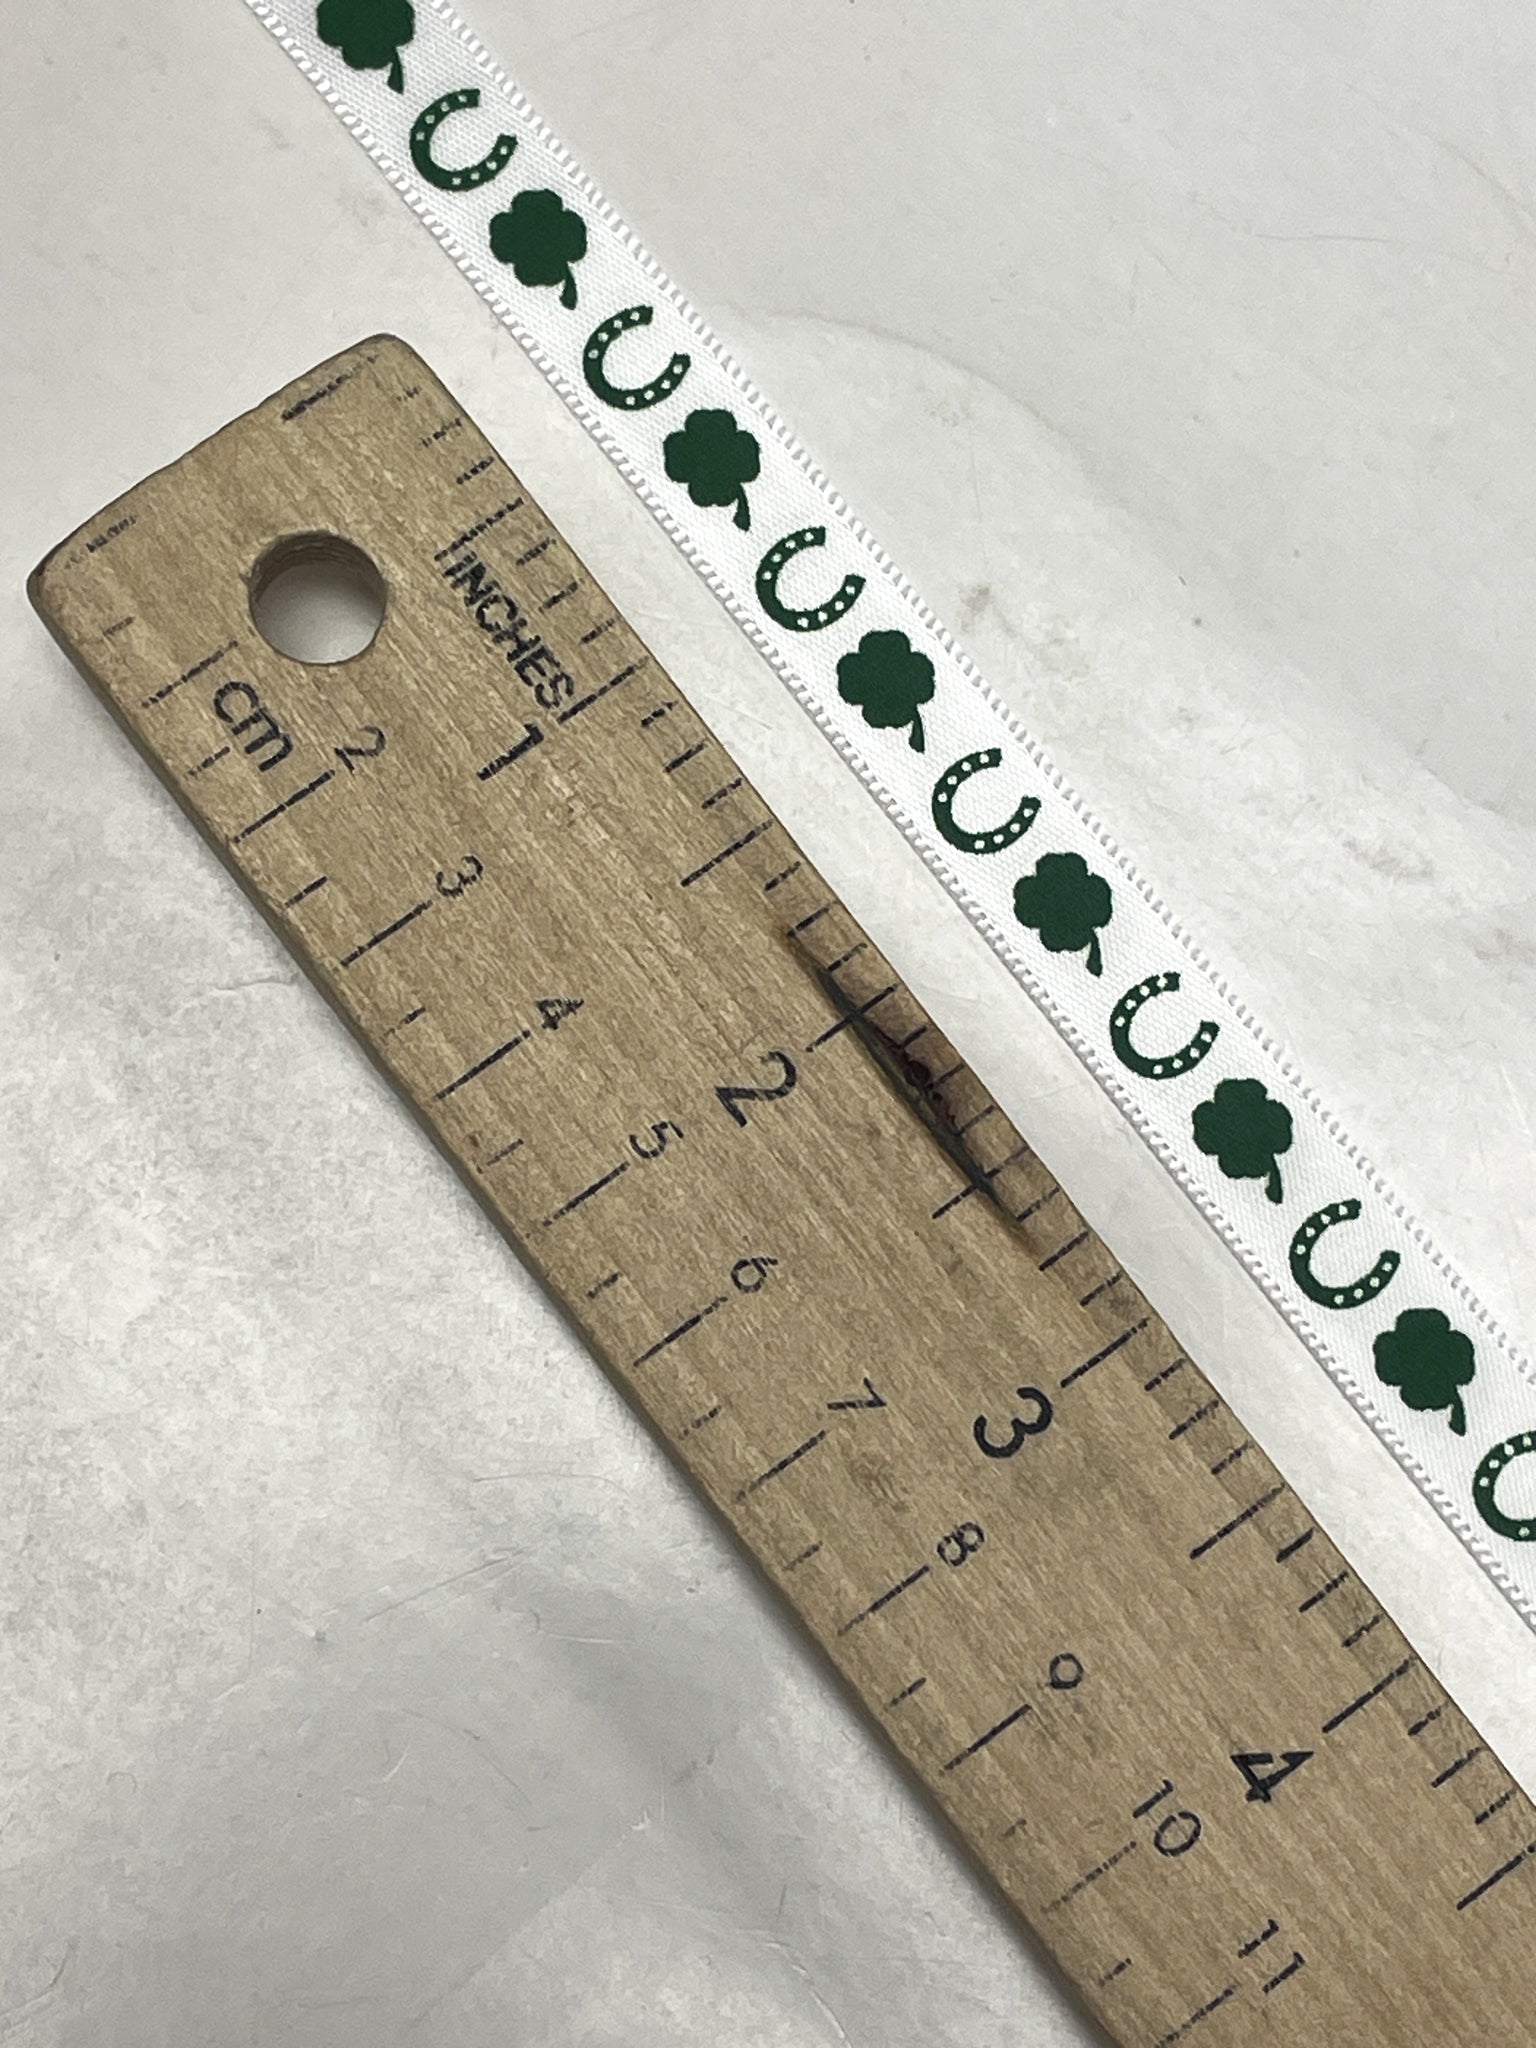 4 YD Polyester Satin Ribbon - White and Printed with Shamrocks and Horseshoes